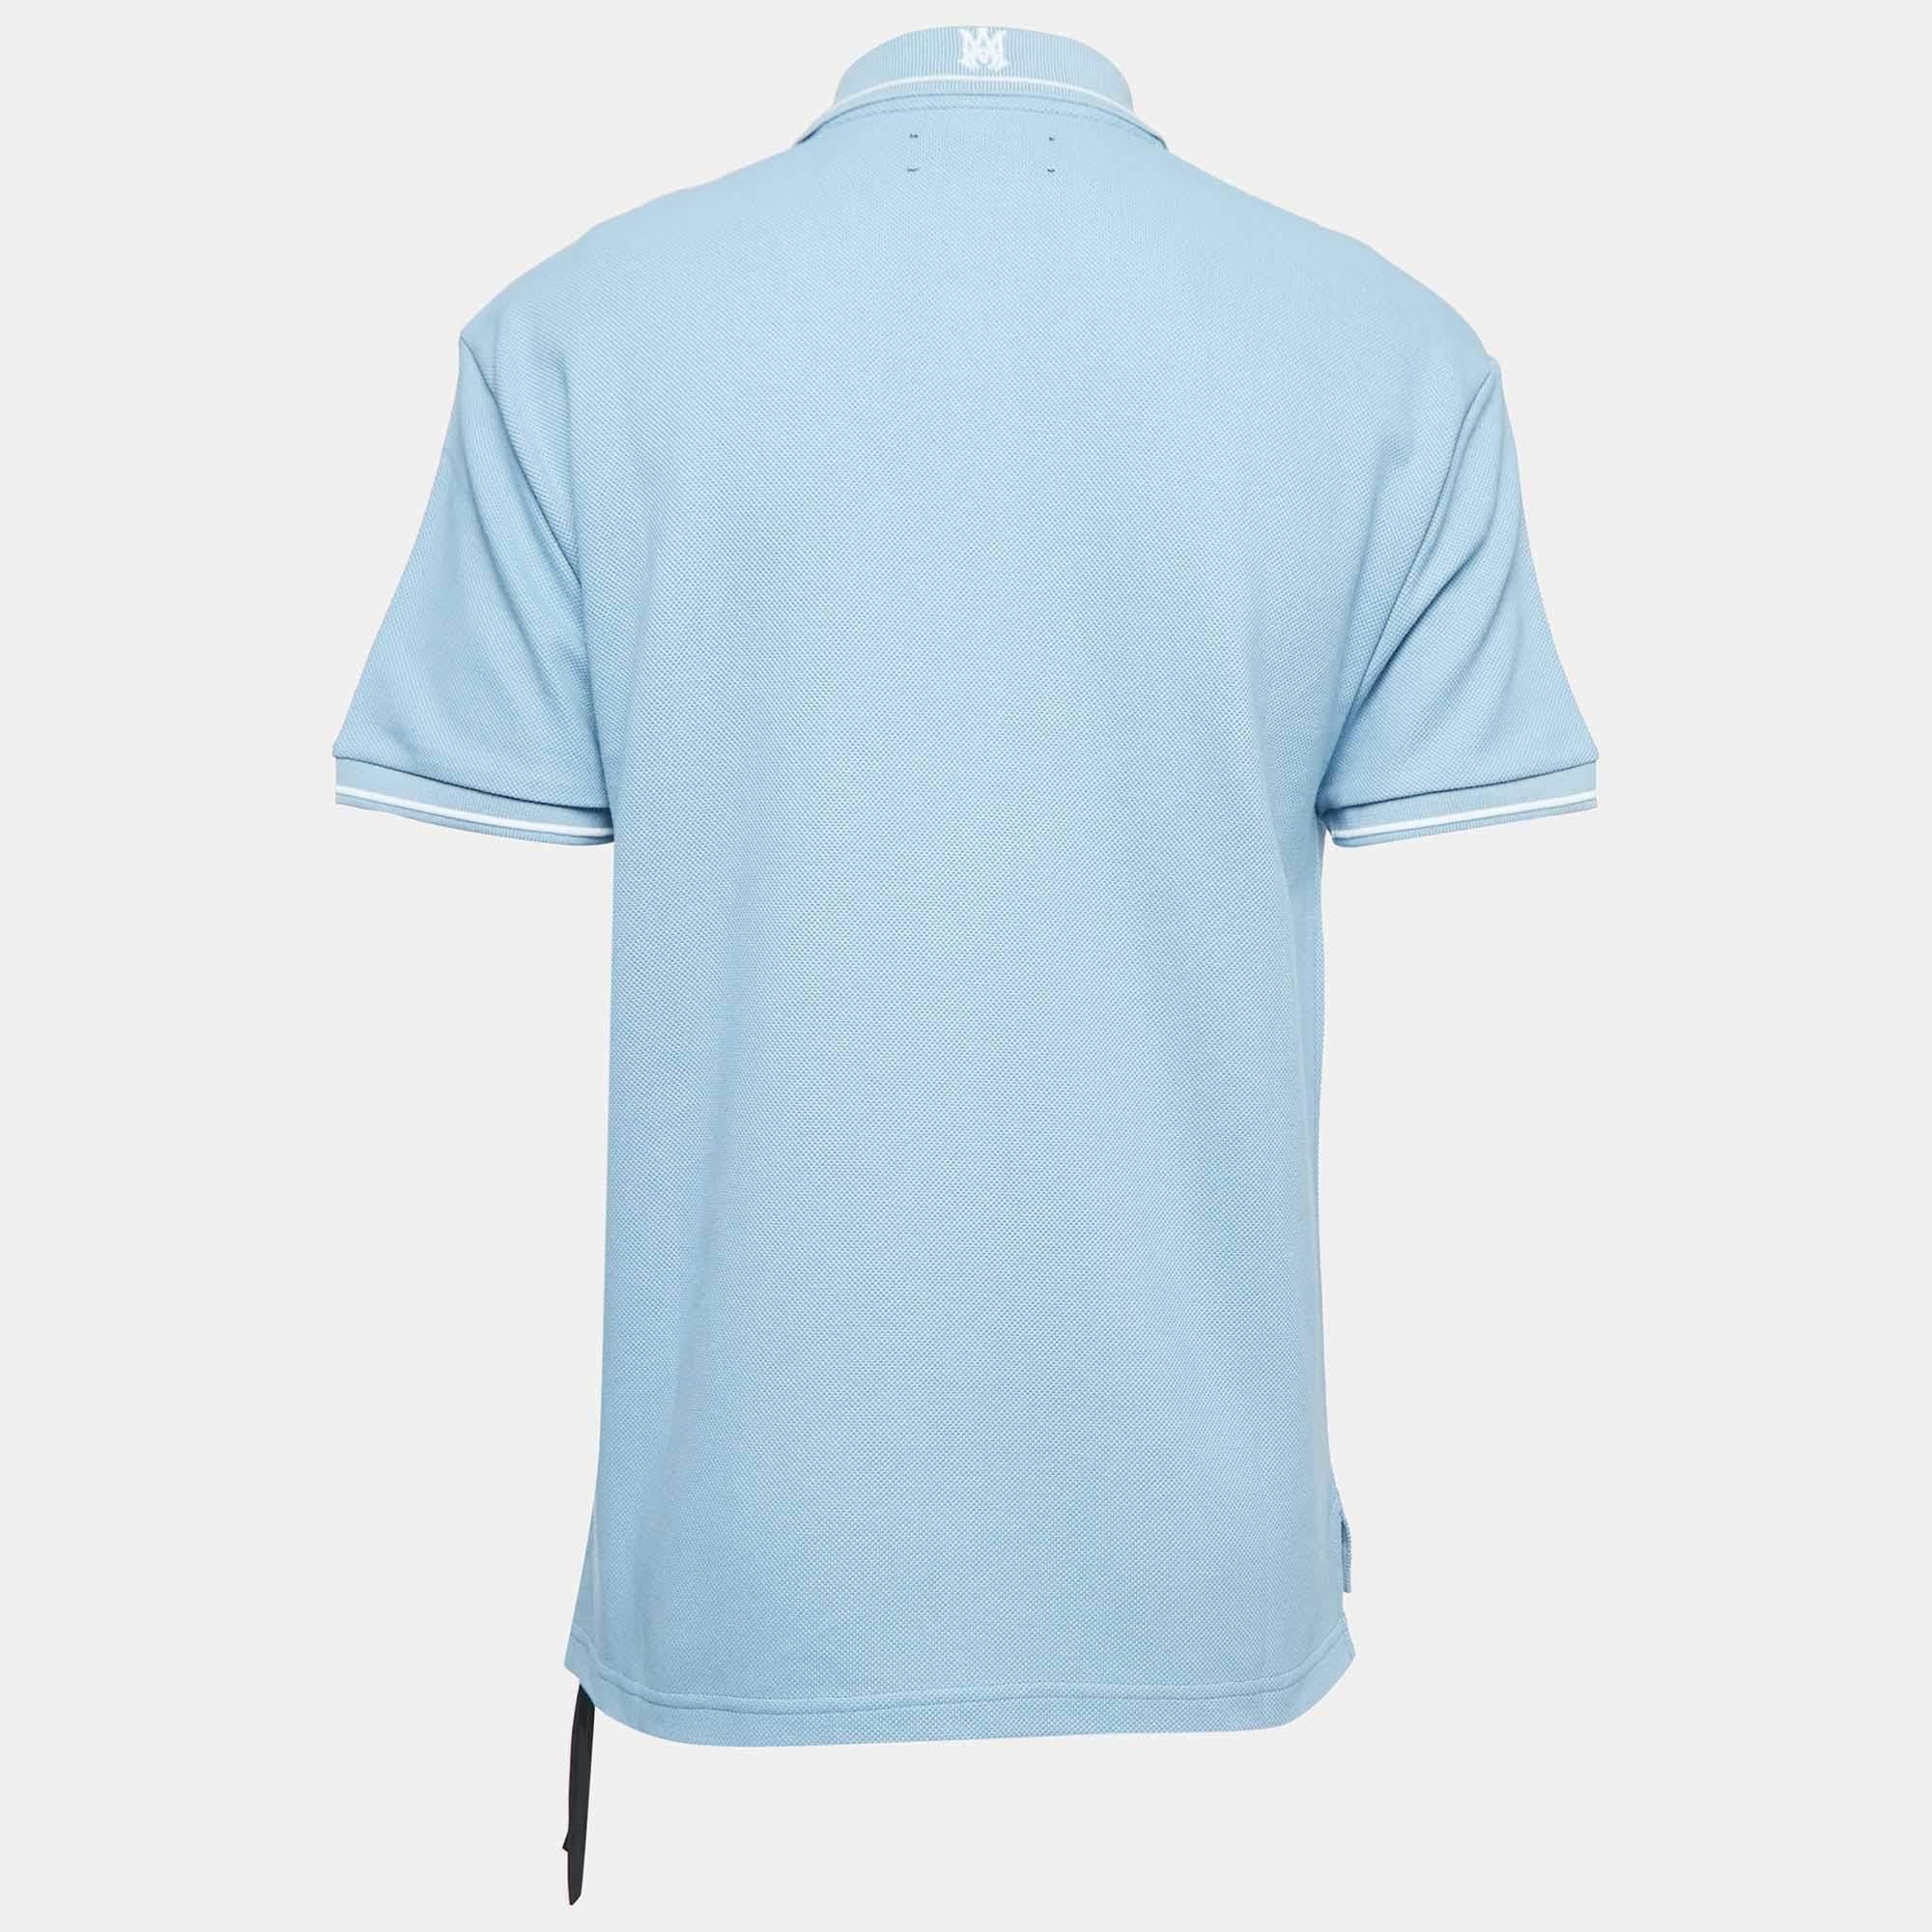 Polo t-shirts have always been a classic pick for anyone. This iteration is tailored using the best fabrics for a comfortable fit. Complete your casual look with a pair of shorts and sneakers.

